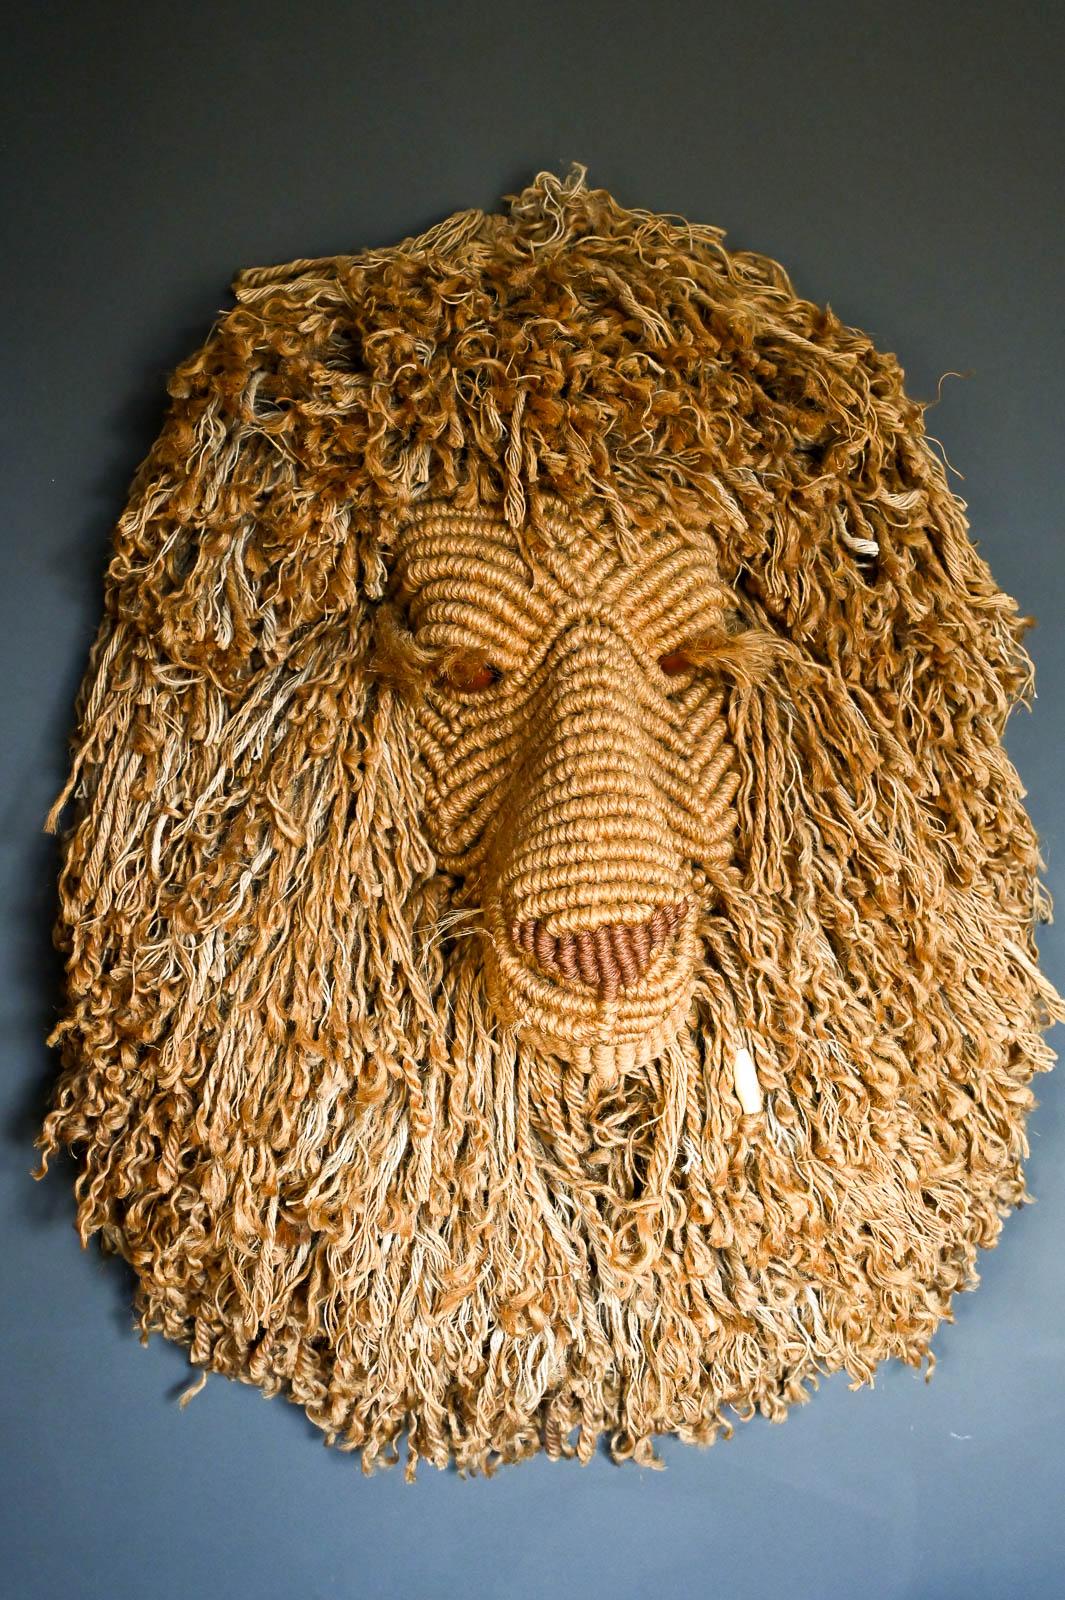 Judee Du Bourdieu lions head jute wall sculpture, 1984 Jute sculpture of lion's head, Judee Du Bourdieu is known for her work in the medium of jute macrame sculptures with animal themes, having perfected this Craft since the early 1970s. Signed on a